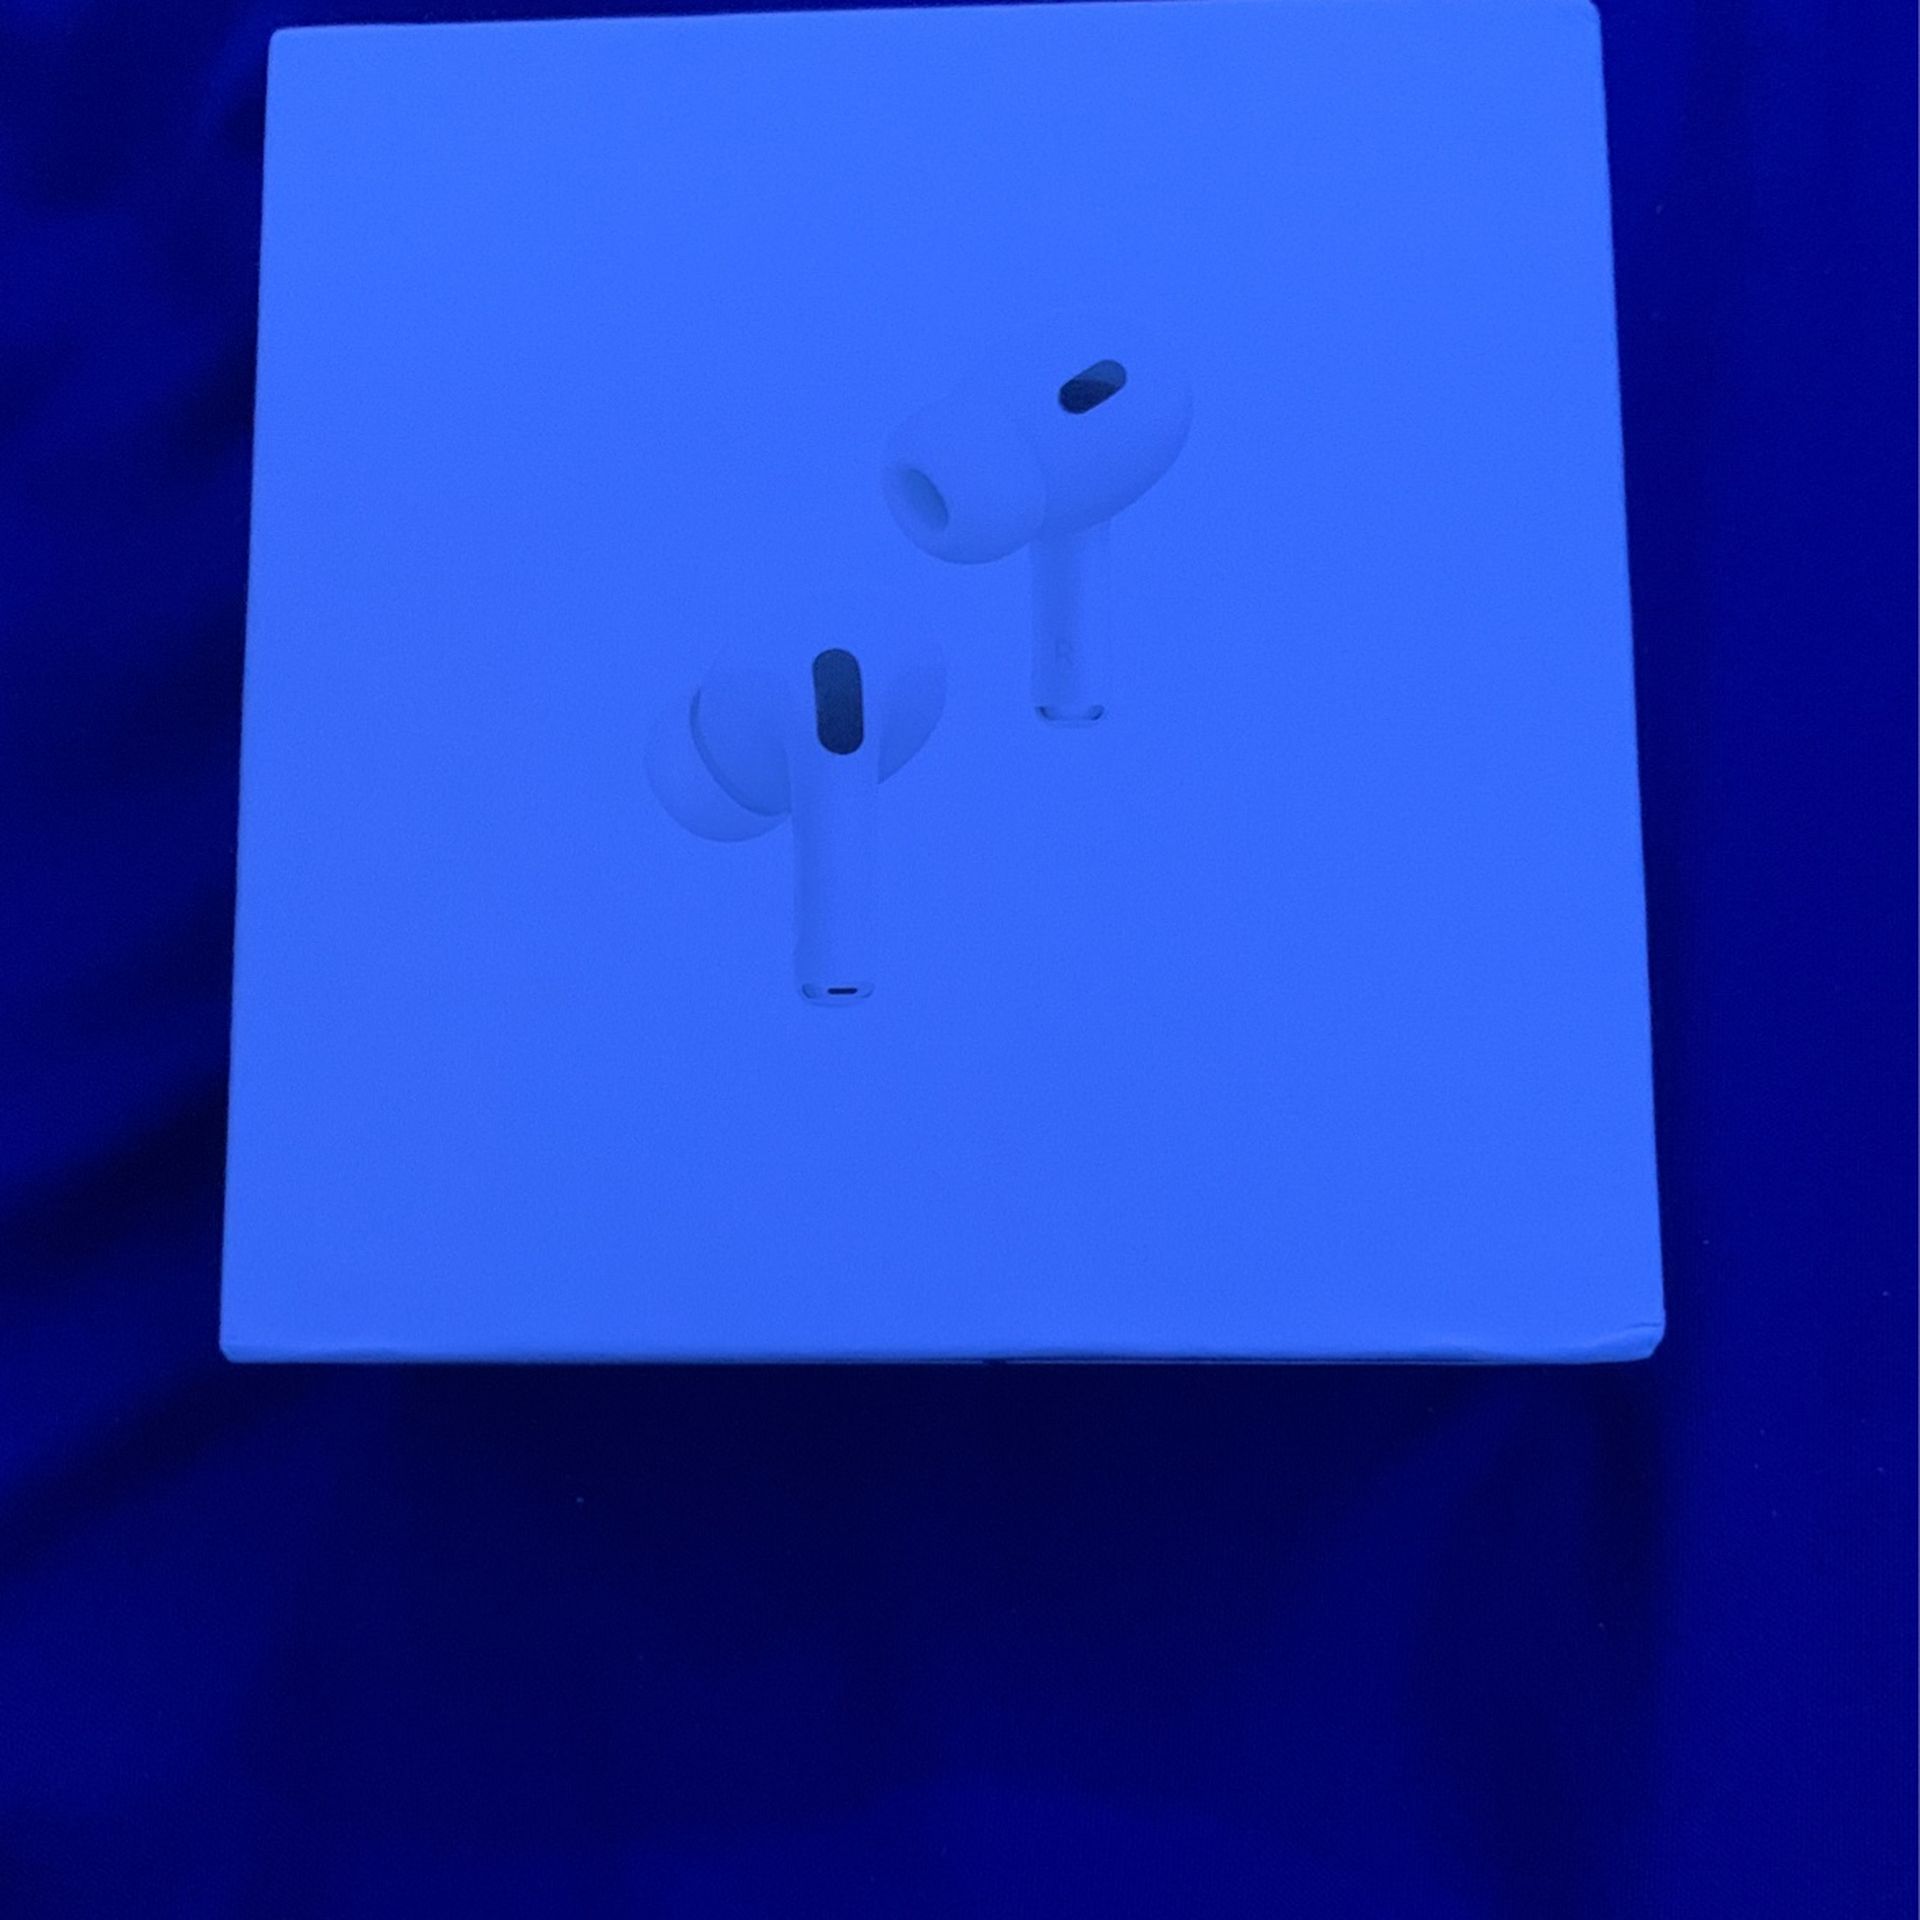 *BEST OFFER* Airpod Pros 2nd Generation (New)